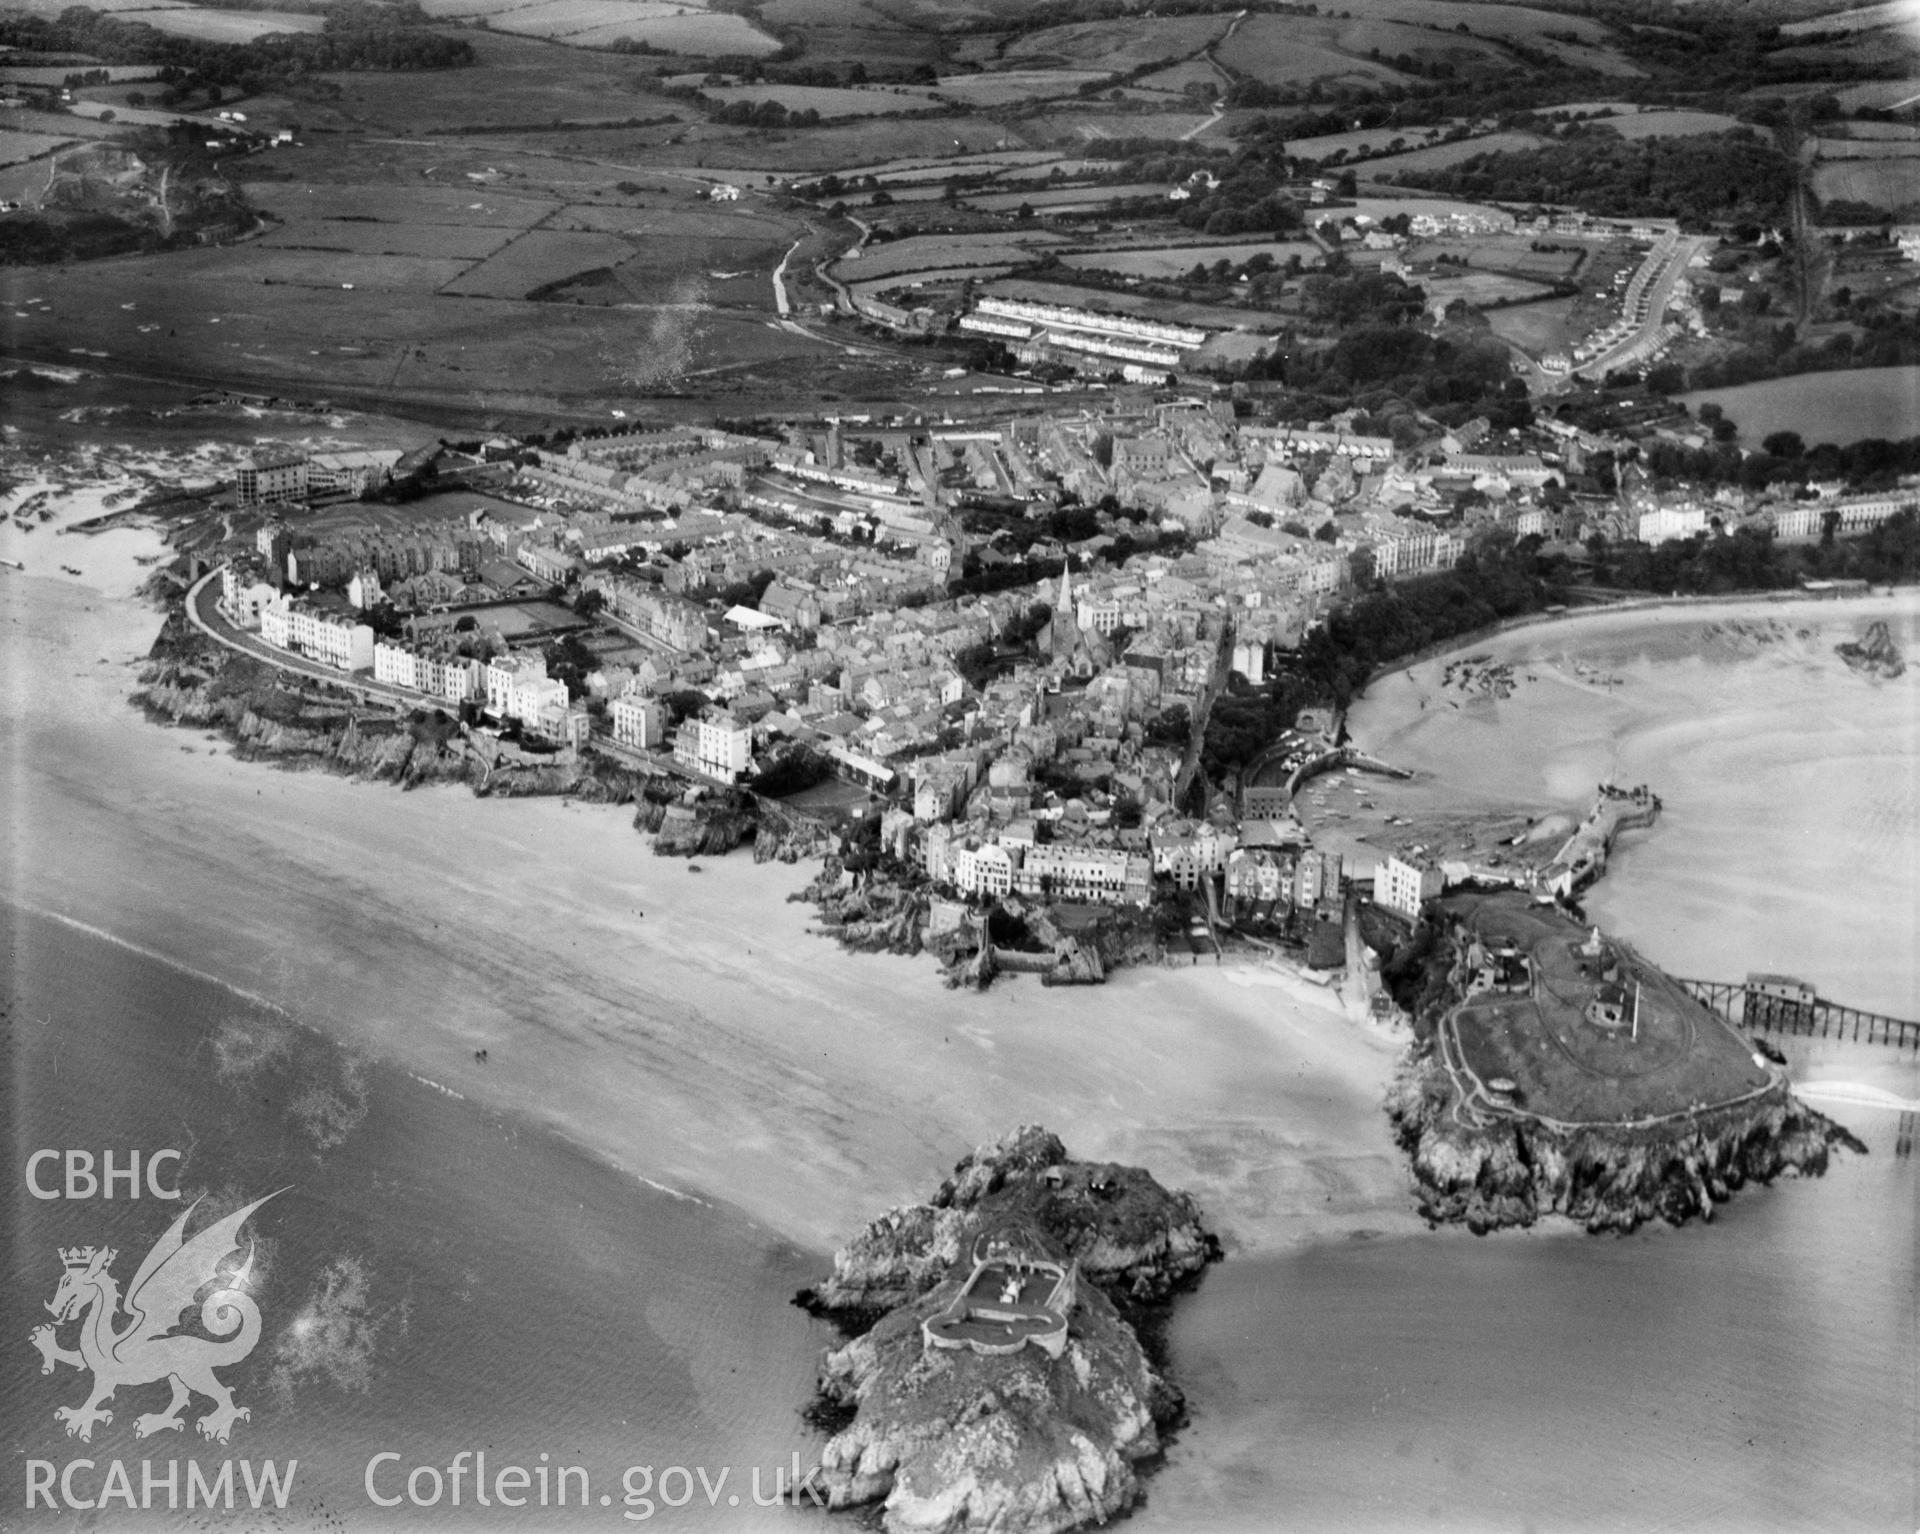 General view of Tenby, showing St Catherines Island, oblique aerial view. 5?x4? black and white glass plate negative.